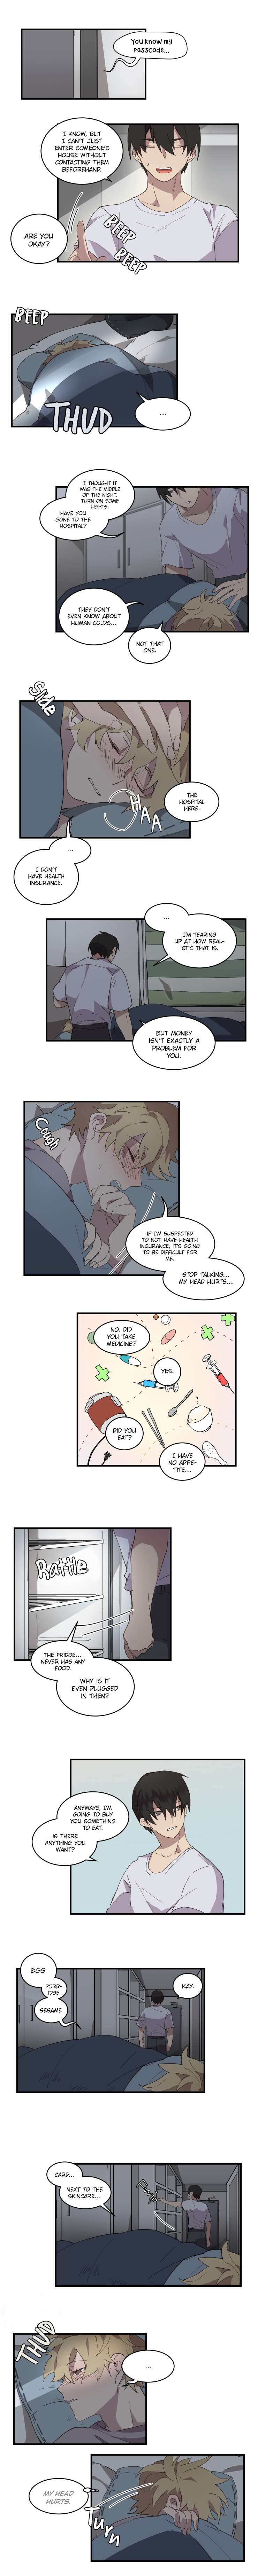 Fill Me Up, Mr. Assistant! - Page 2